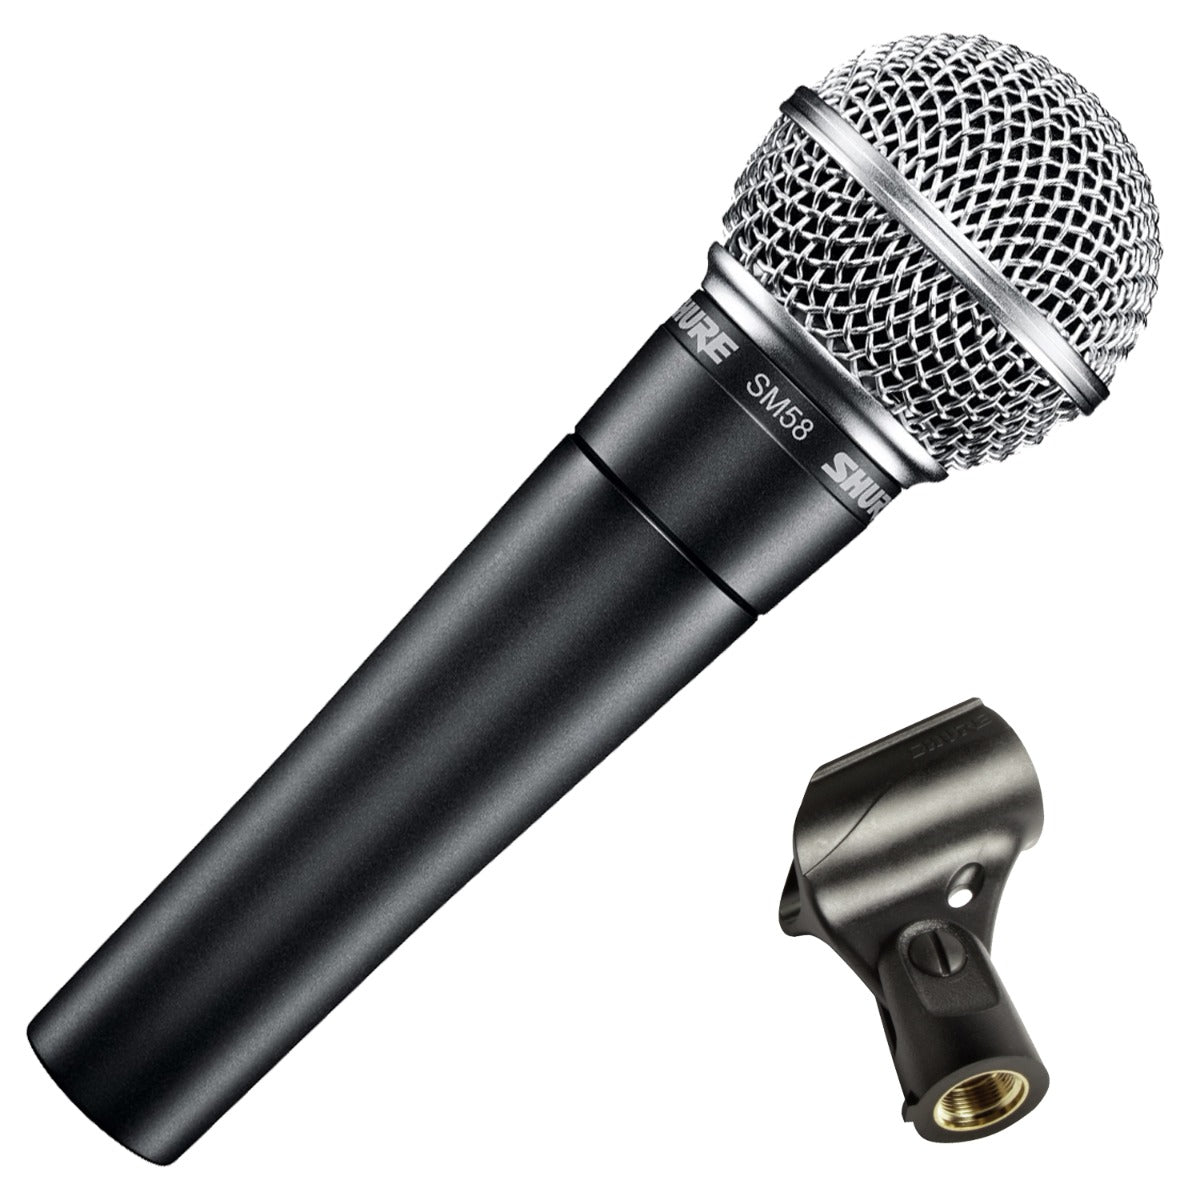 Shure SM58 Cardioid Dynamic Vocal Microphone 10-Pack